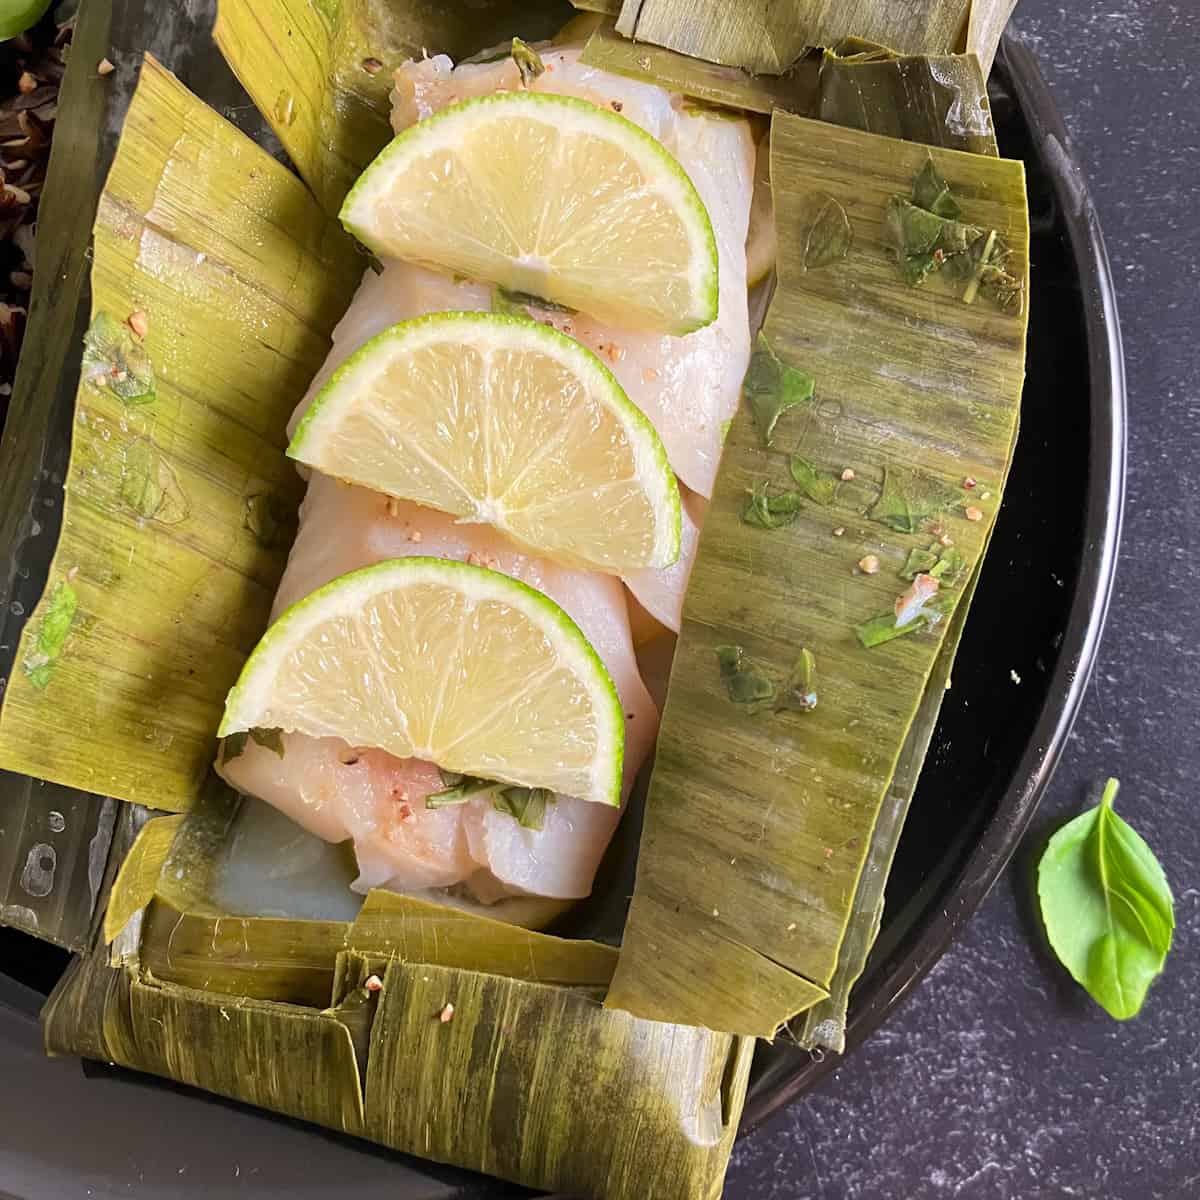 Red Snapper Wrapped In Banana Leaves, wrapped